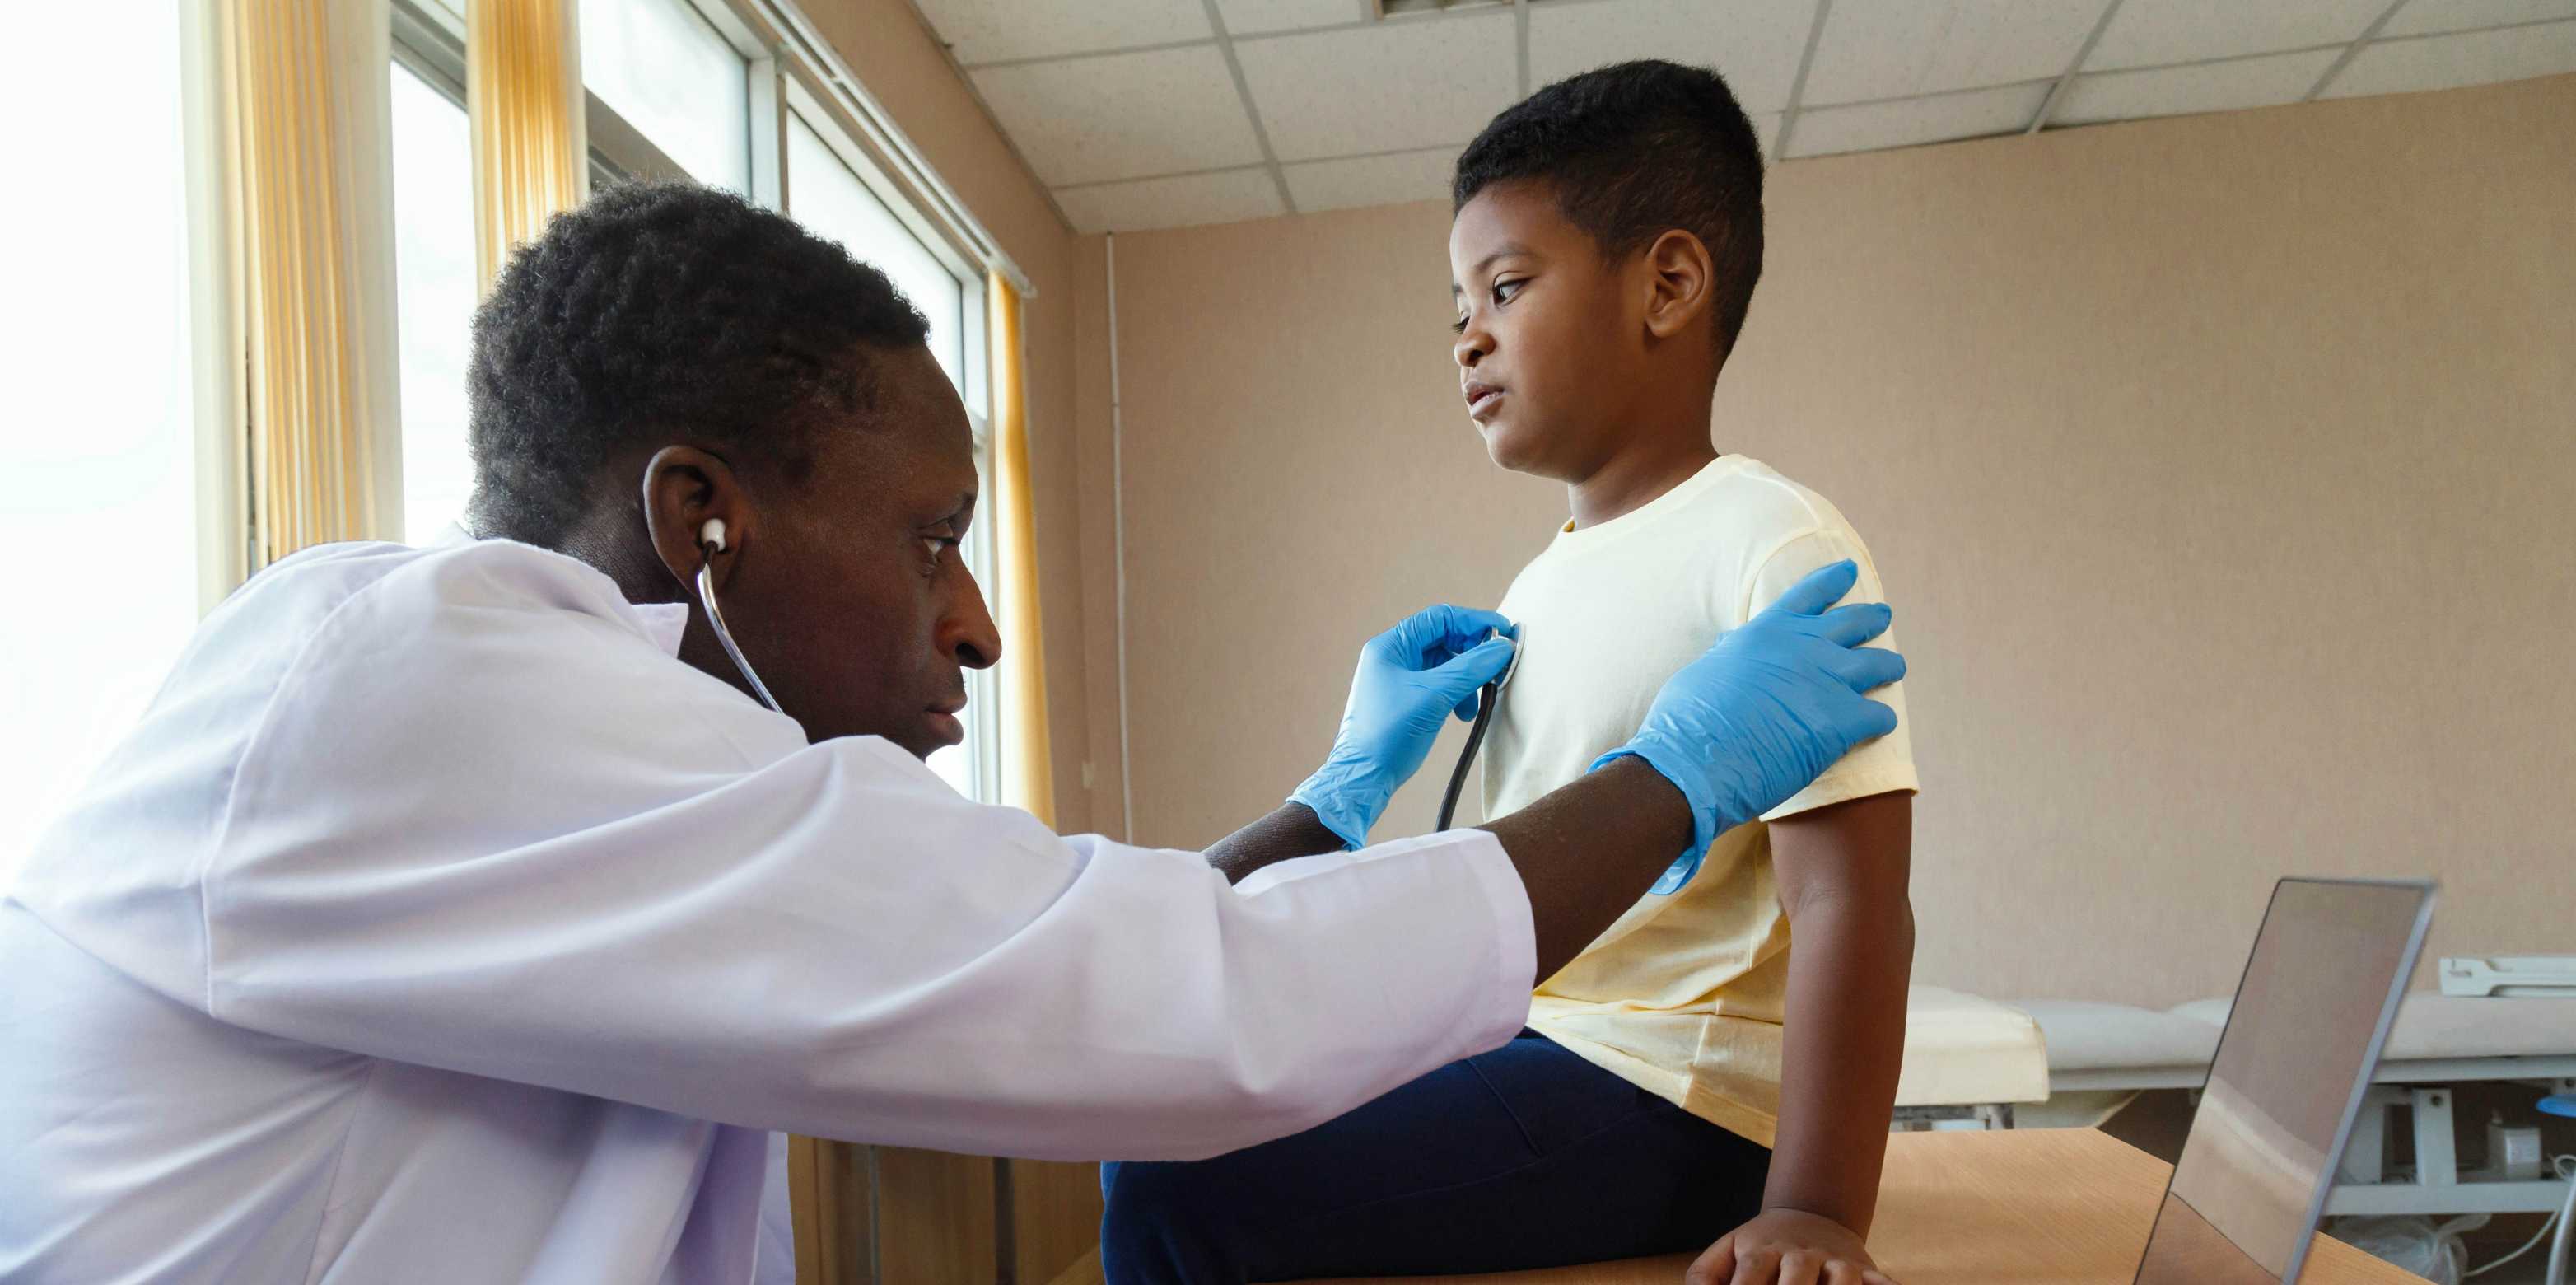 A doctor examines a child